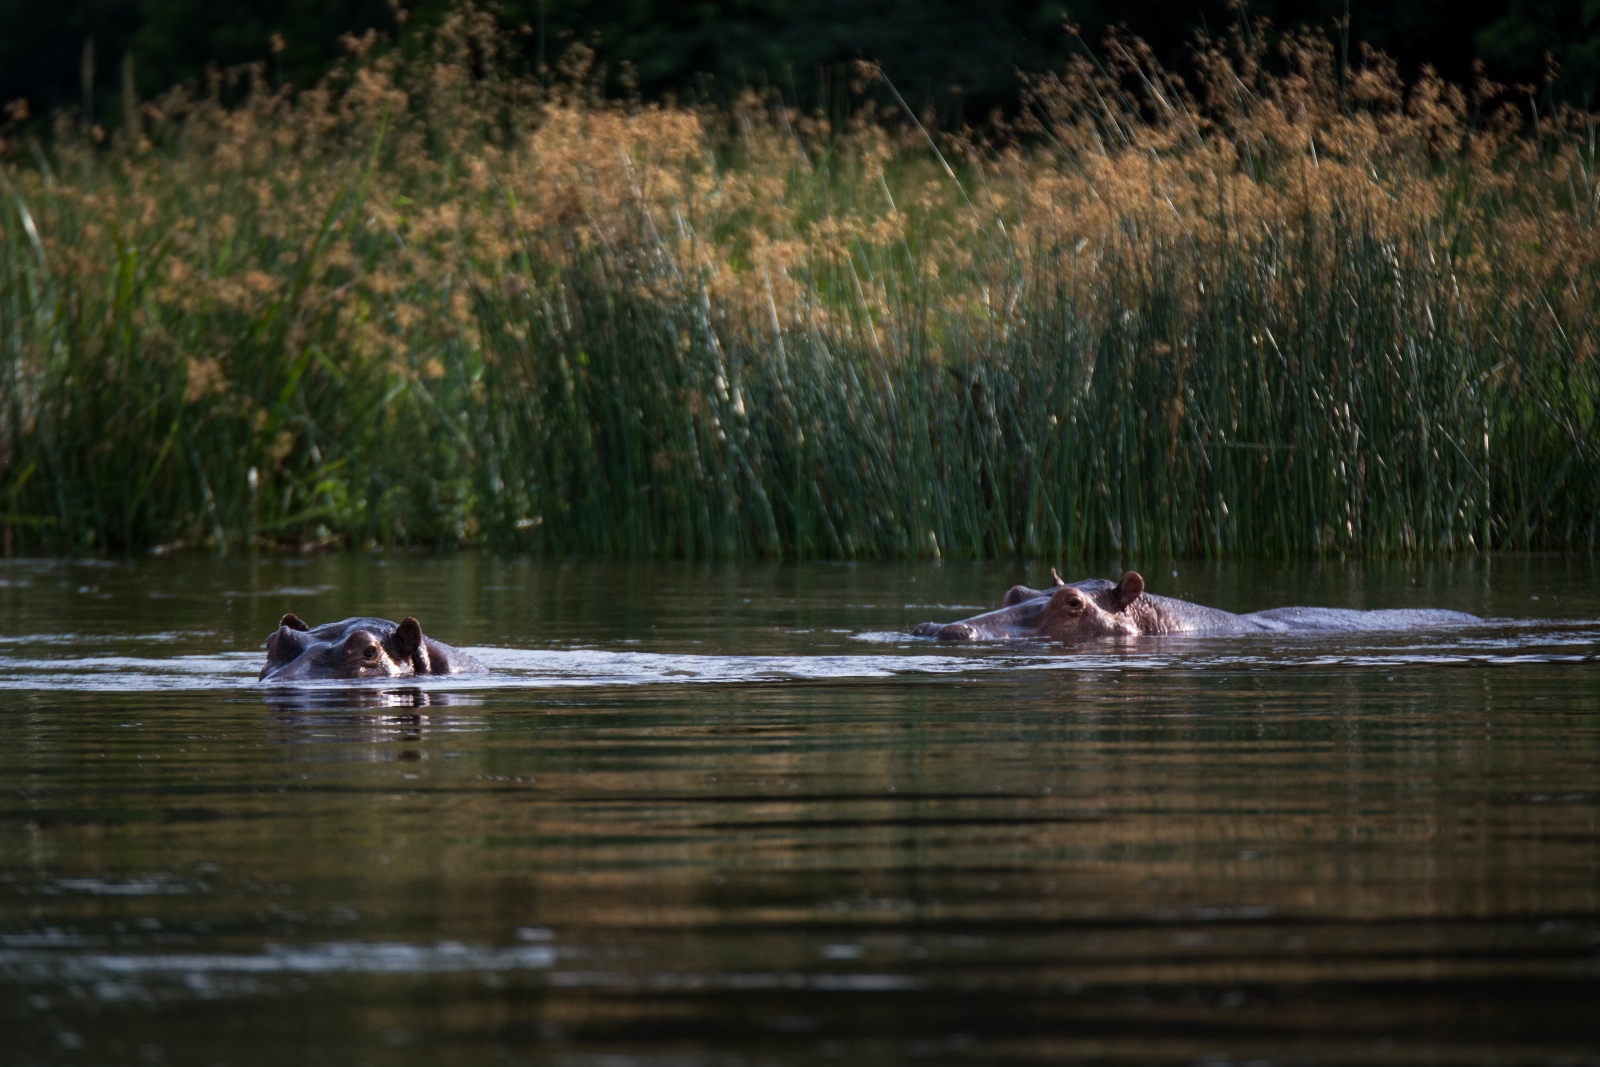 Hippos appear and disappear occasionally adding to the thrill of a Zambezi canoeing experience.